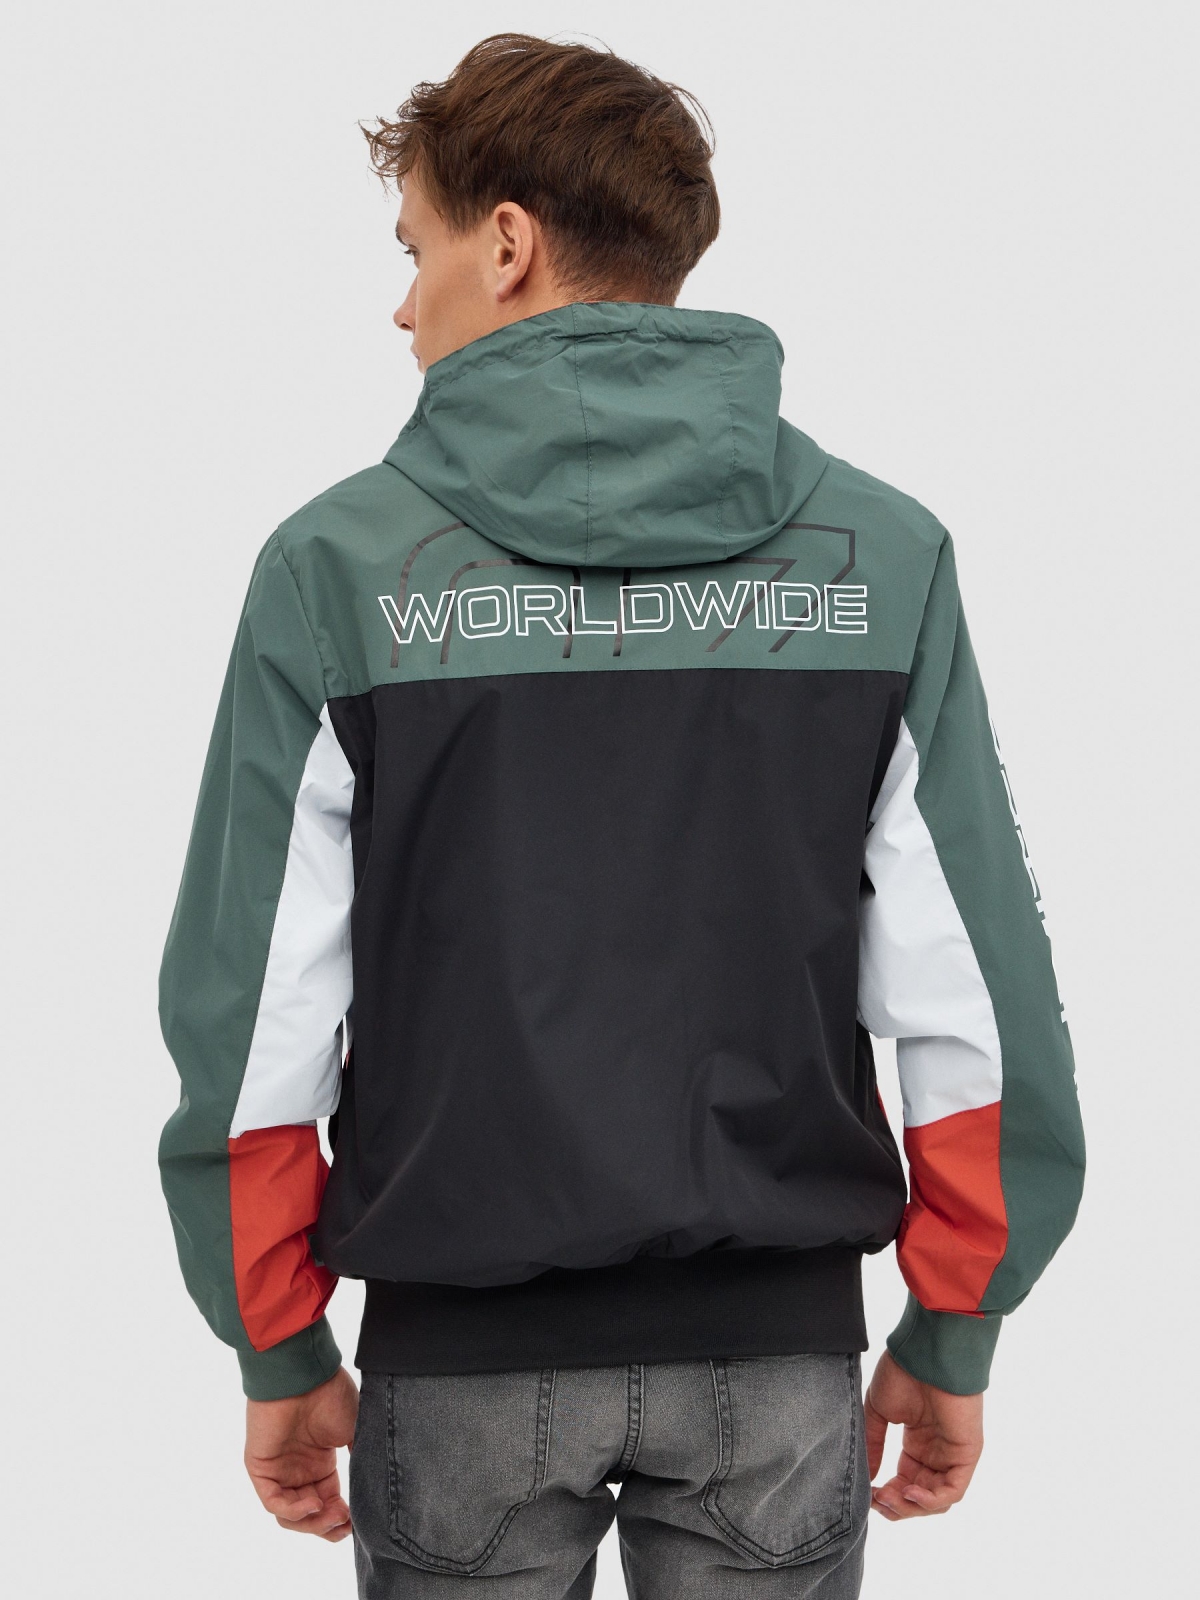 Colour block jacket greyish green middle back view